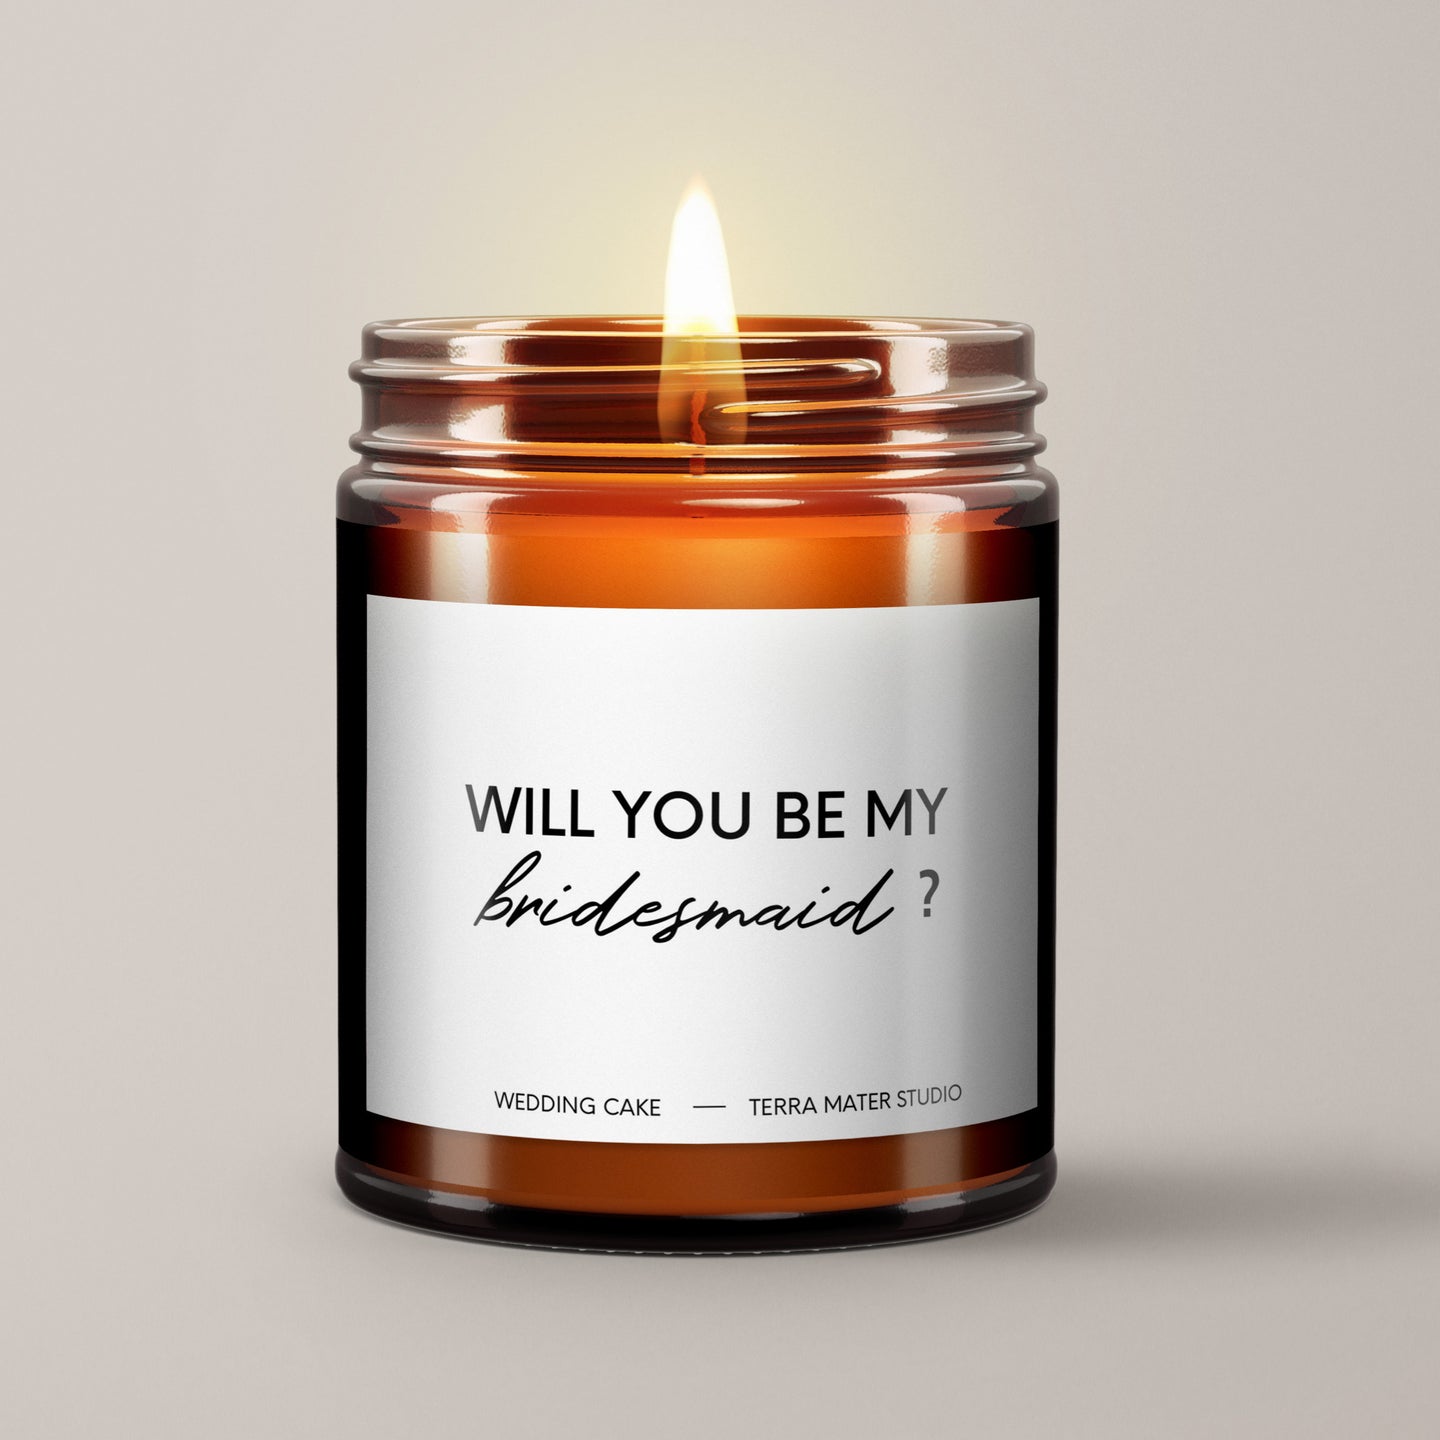 Will You Be My Bridesmaid? Soy Wax Candle | Bridesmaid Proposal Gift